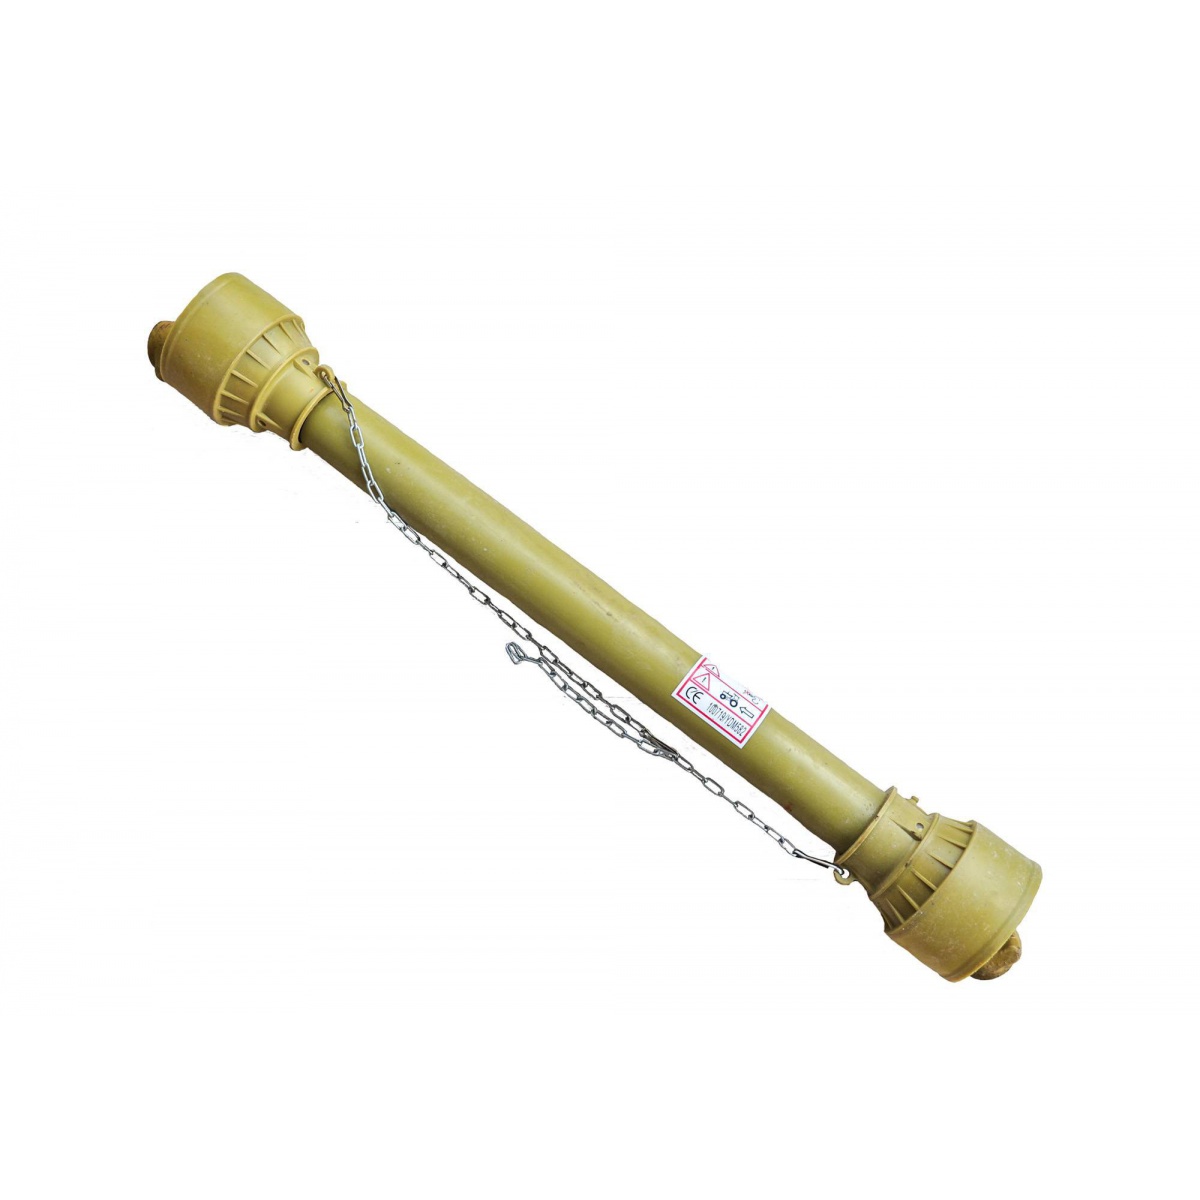 PTO shaft 025B - 70cm / up to 24 HP